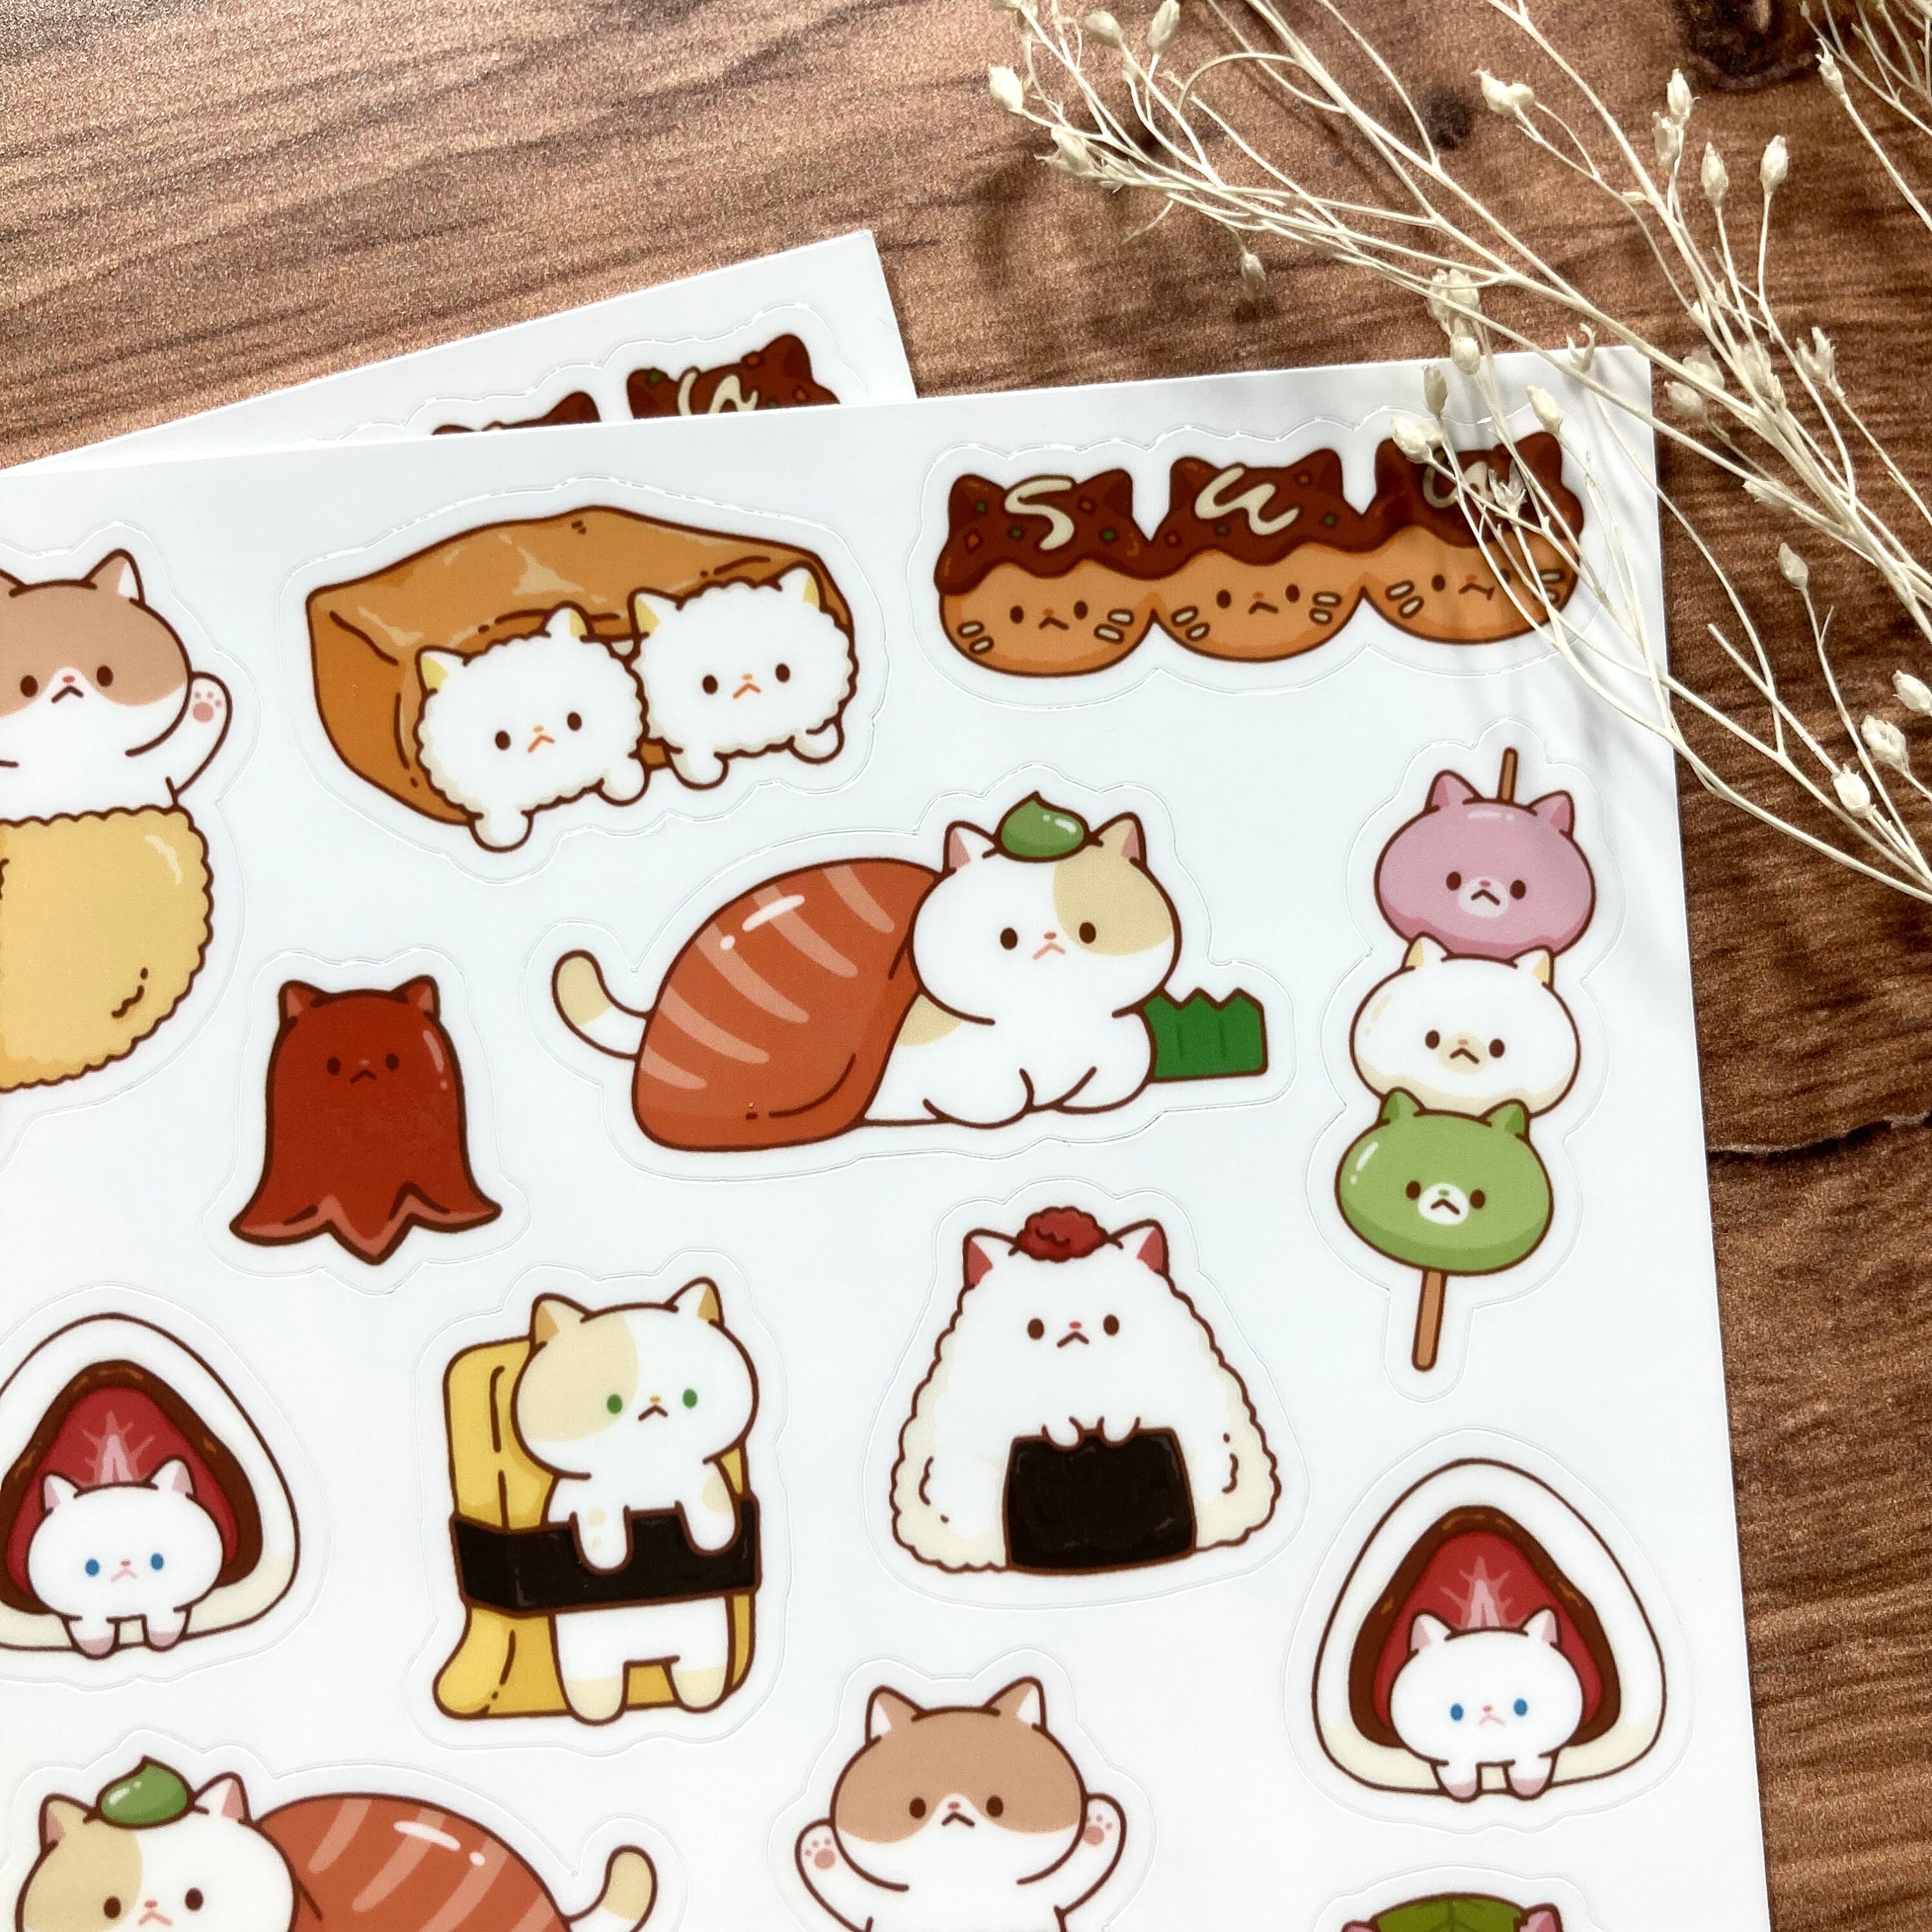 Pixelated Japanese Scrapbook Stickers:  Drinks,Food,Dogs,Cats,Dinosaurs,Fish,Mini Animal,Small Washi Stickers for  Journaling-Scrapbook Supplies.